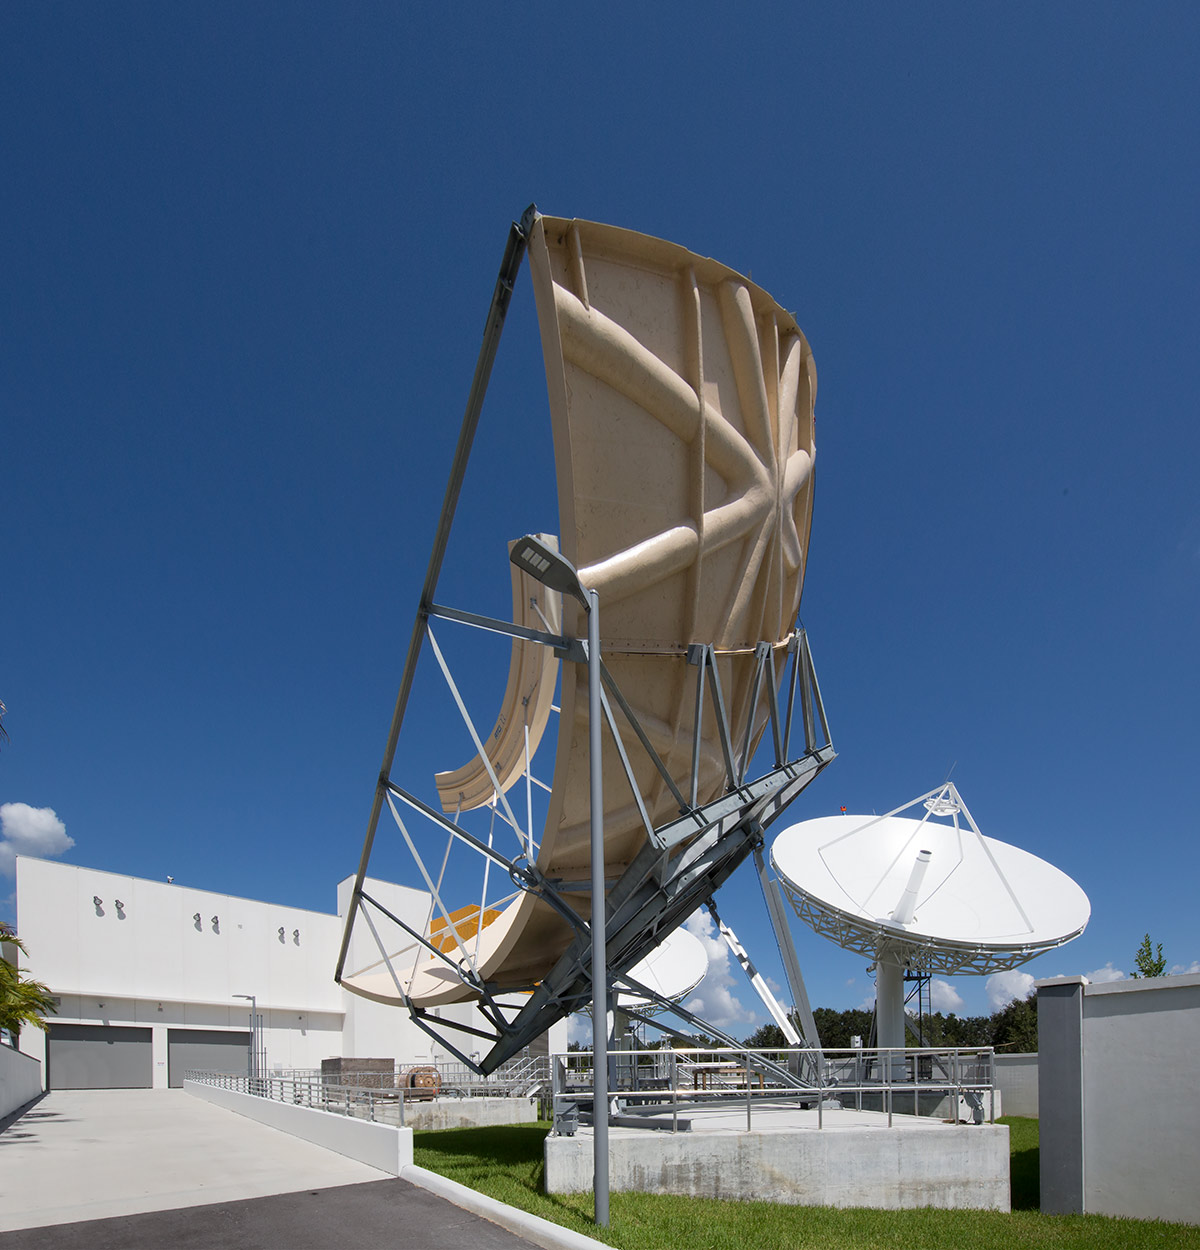 Architectural view of the HBO data center broadcast antenna in Sunrise, FL 